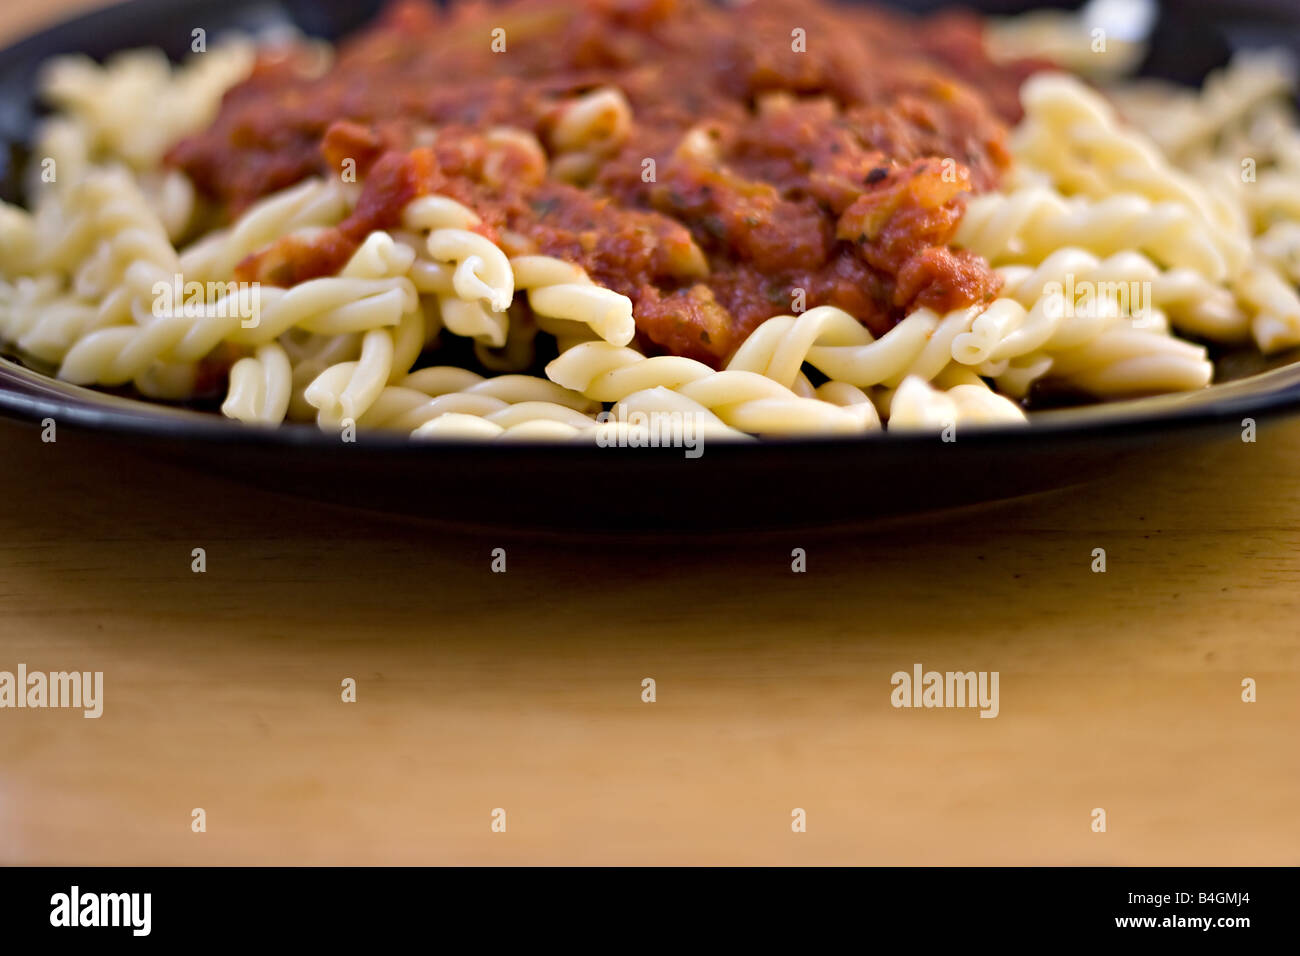 A delicious homemade Italian meal A plate of gemelli pasta with fresh homemade marinara sauce Stock Photo